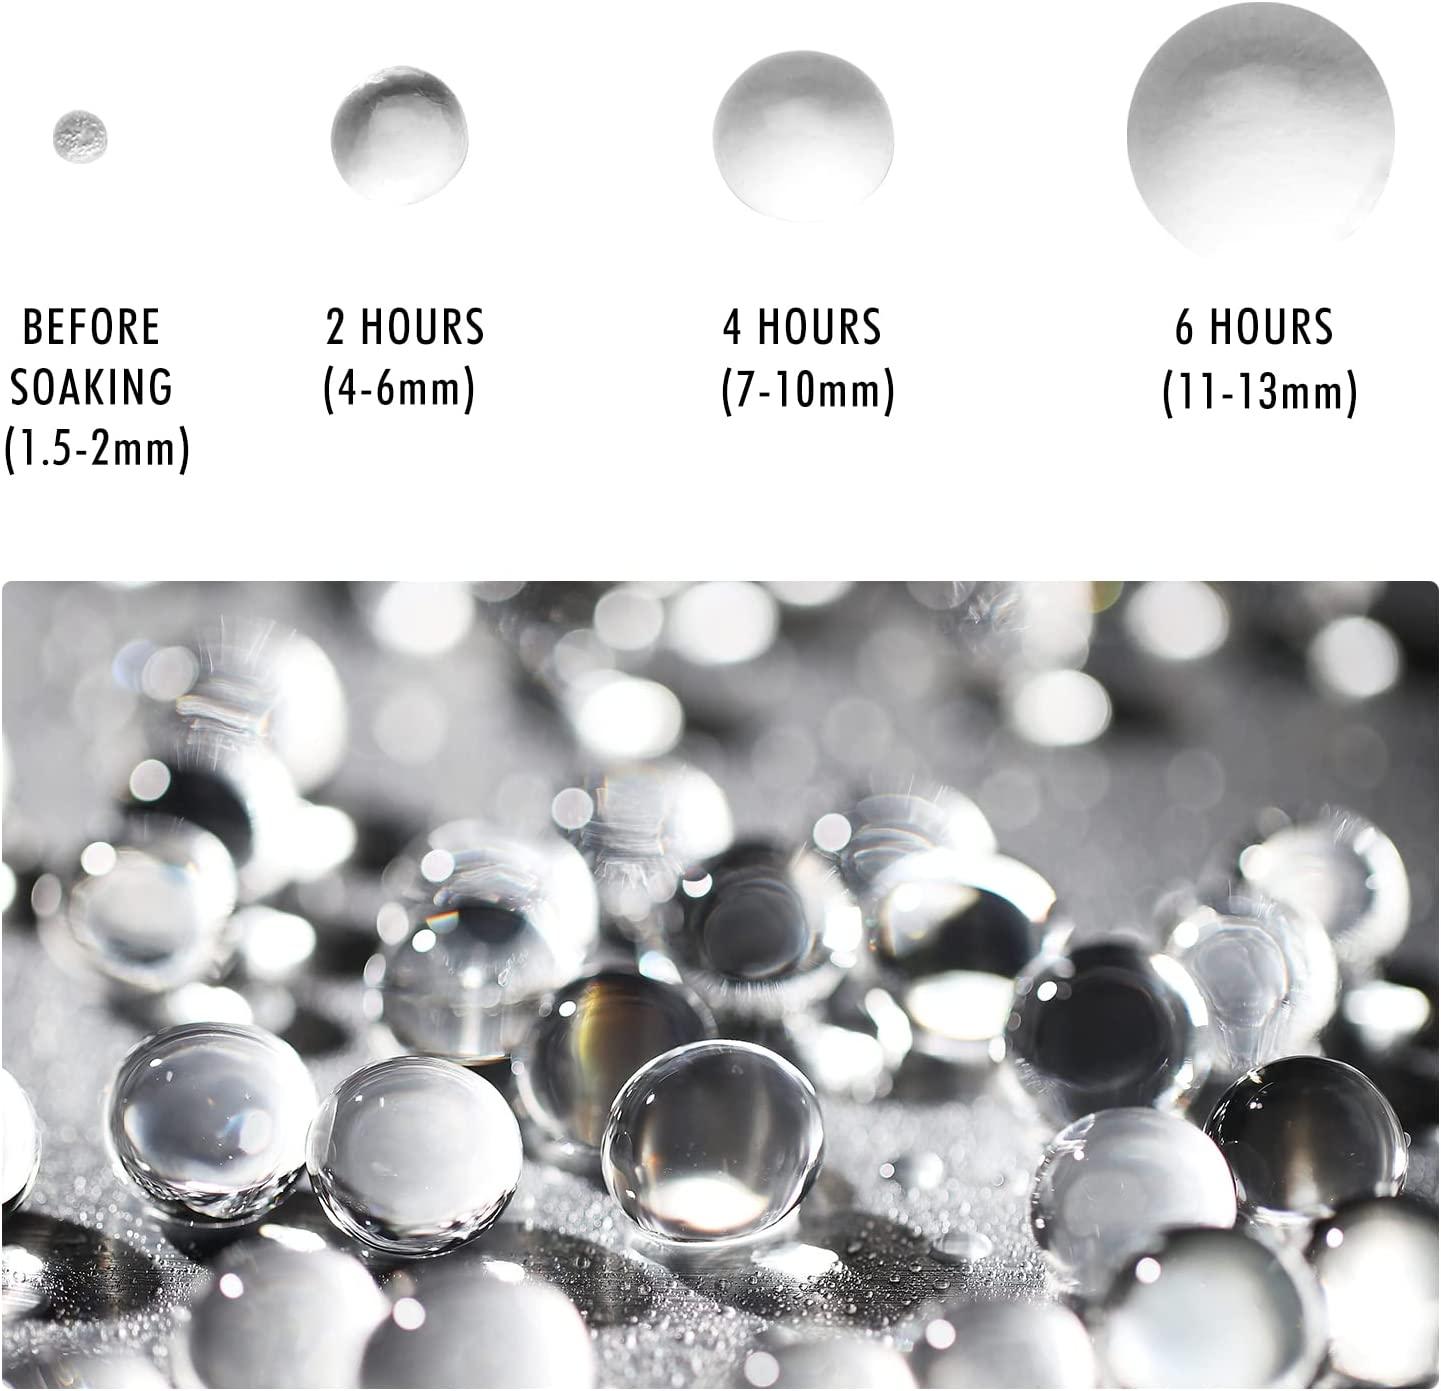 70000 Clear Water Beads for Vases, Vase Fillers Water Gel Jelly